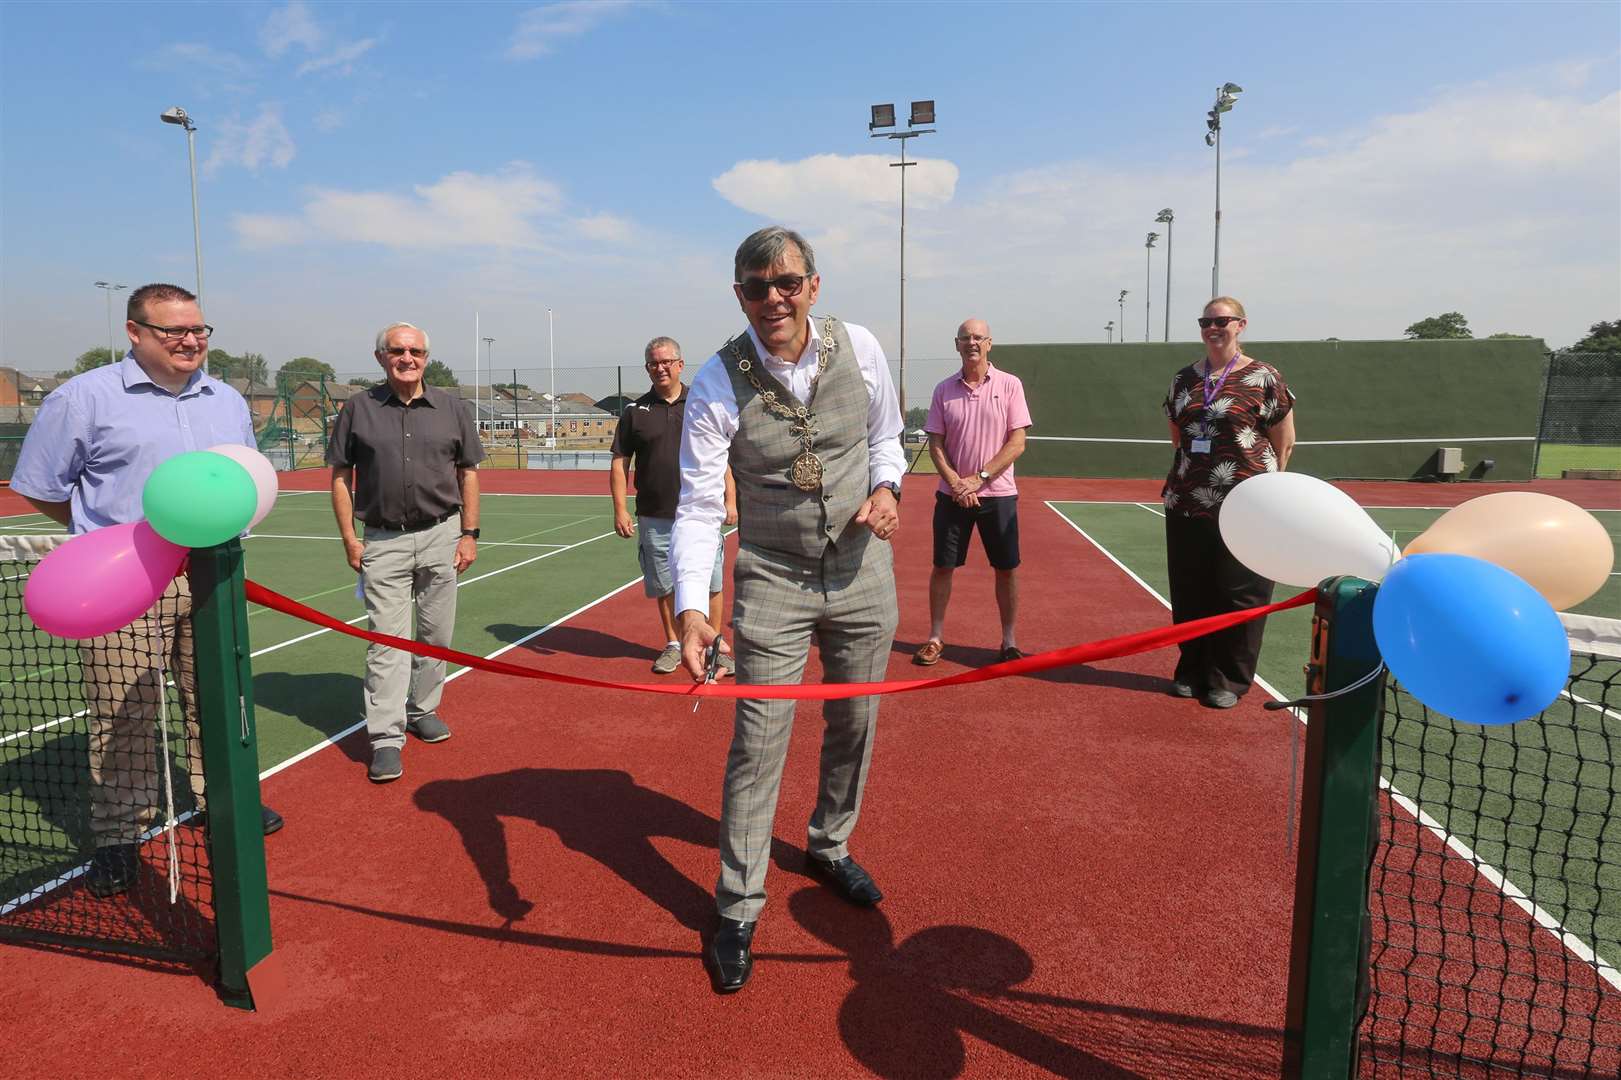 Gravesham mayor John Caller opens the new courts at Gravesham Tennis Club. Picture: Rob Powell